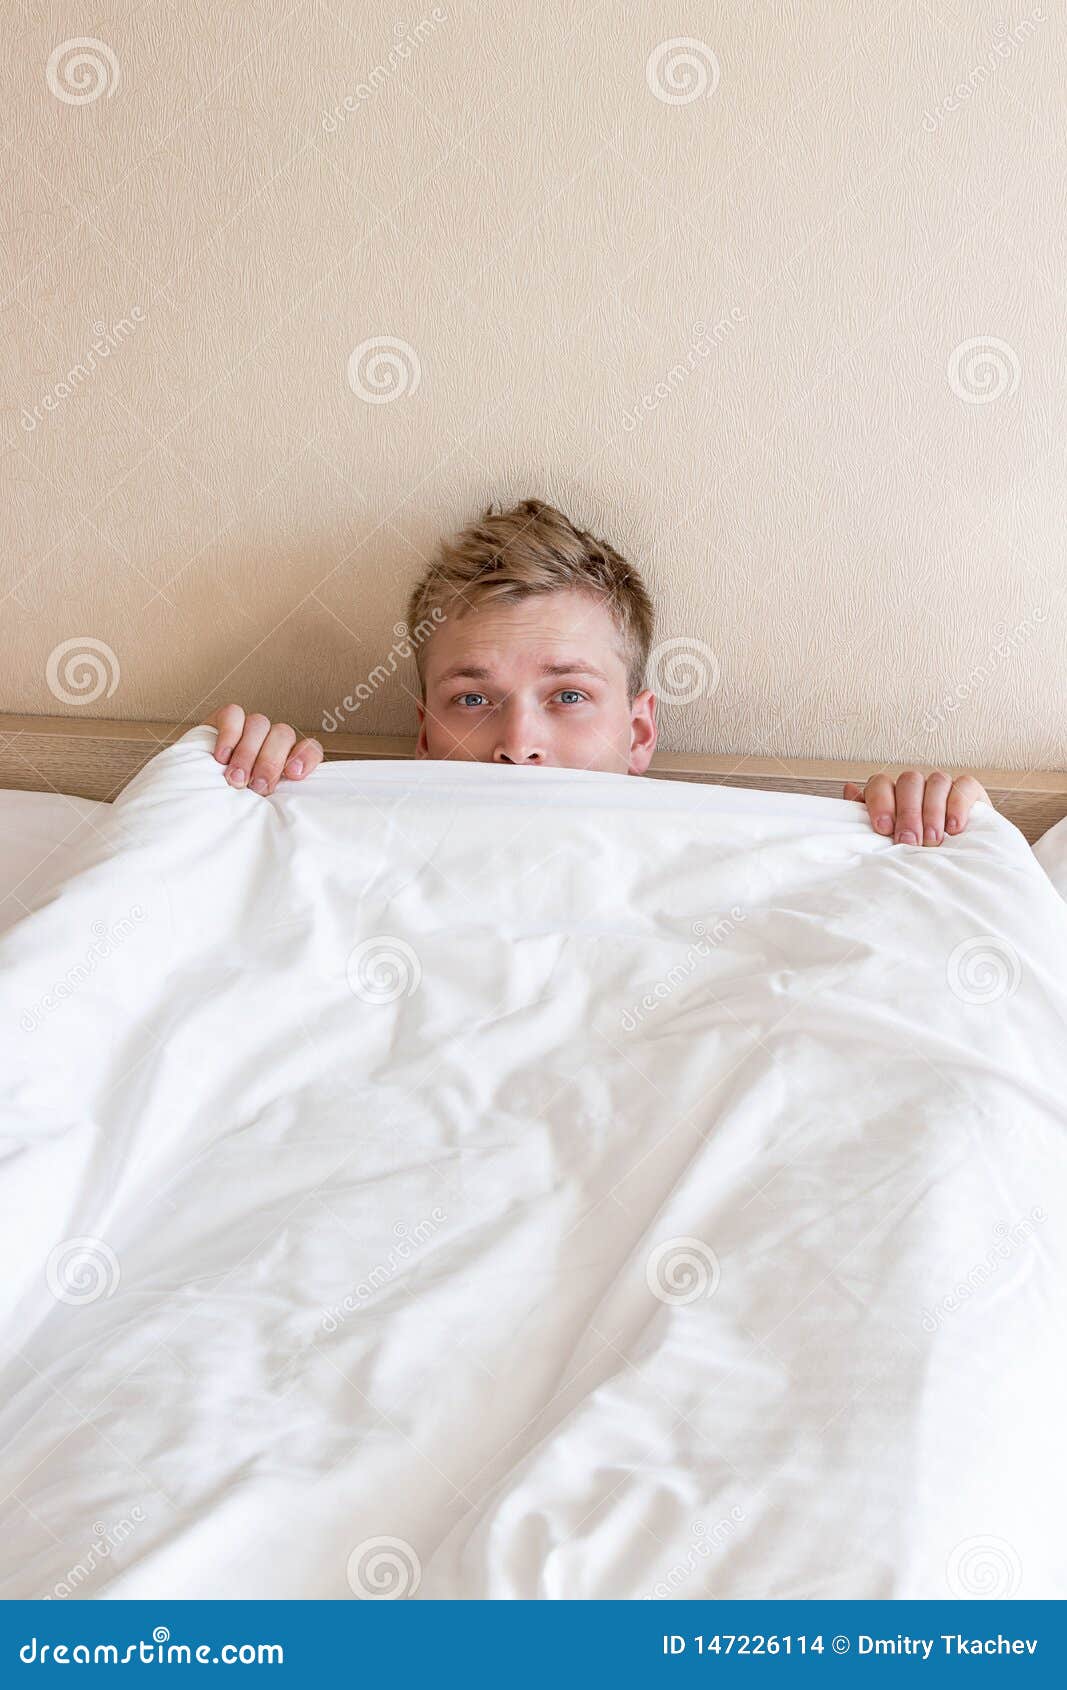 Funny Guy in Bed Under the Blanket after Sleeping. Sleepy Man Waking Up  Stock Photo - Image of morning, awake: 147226114